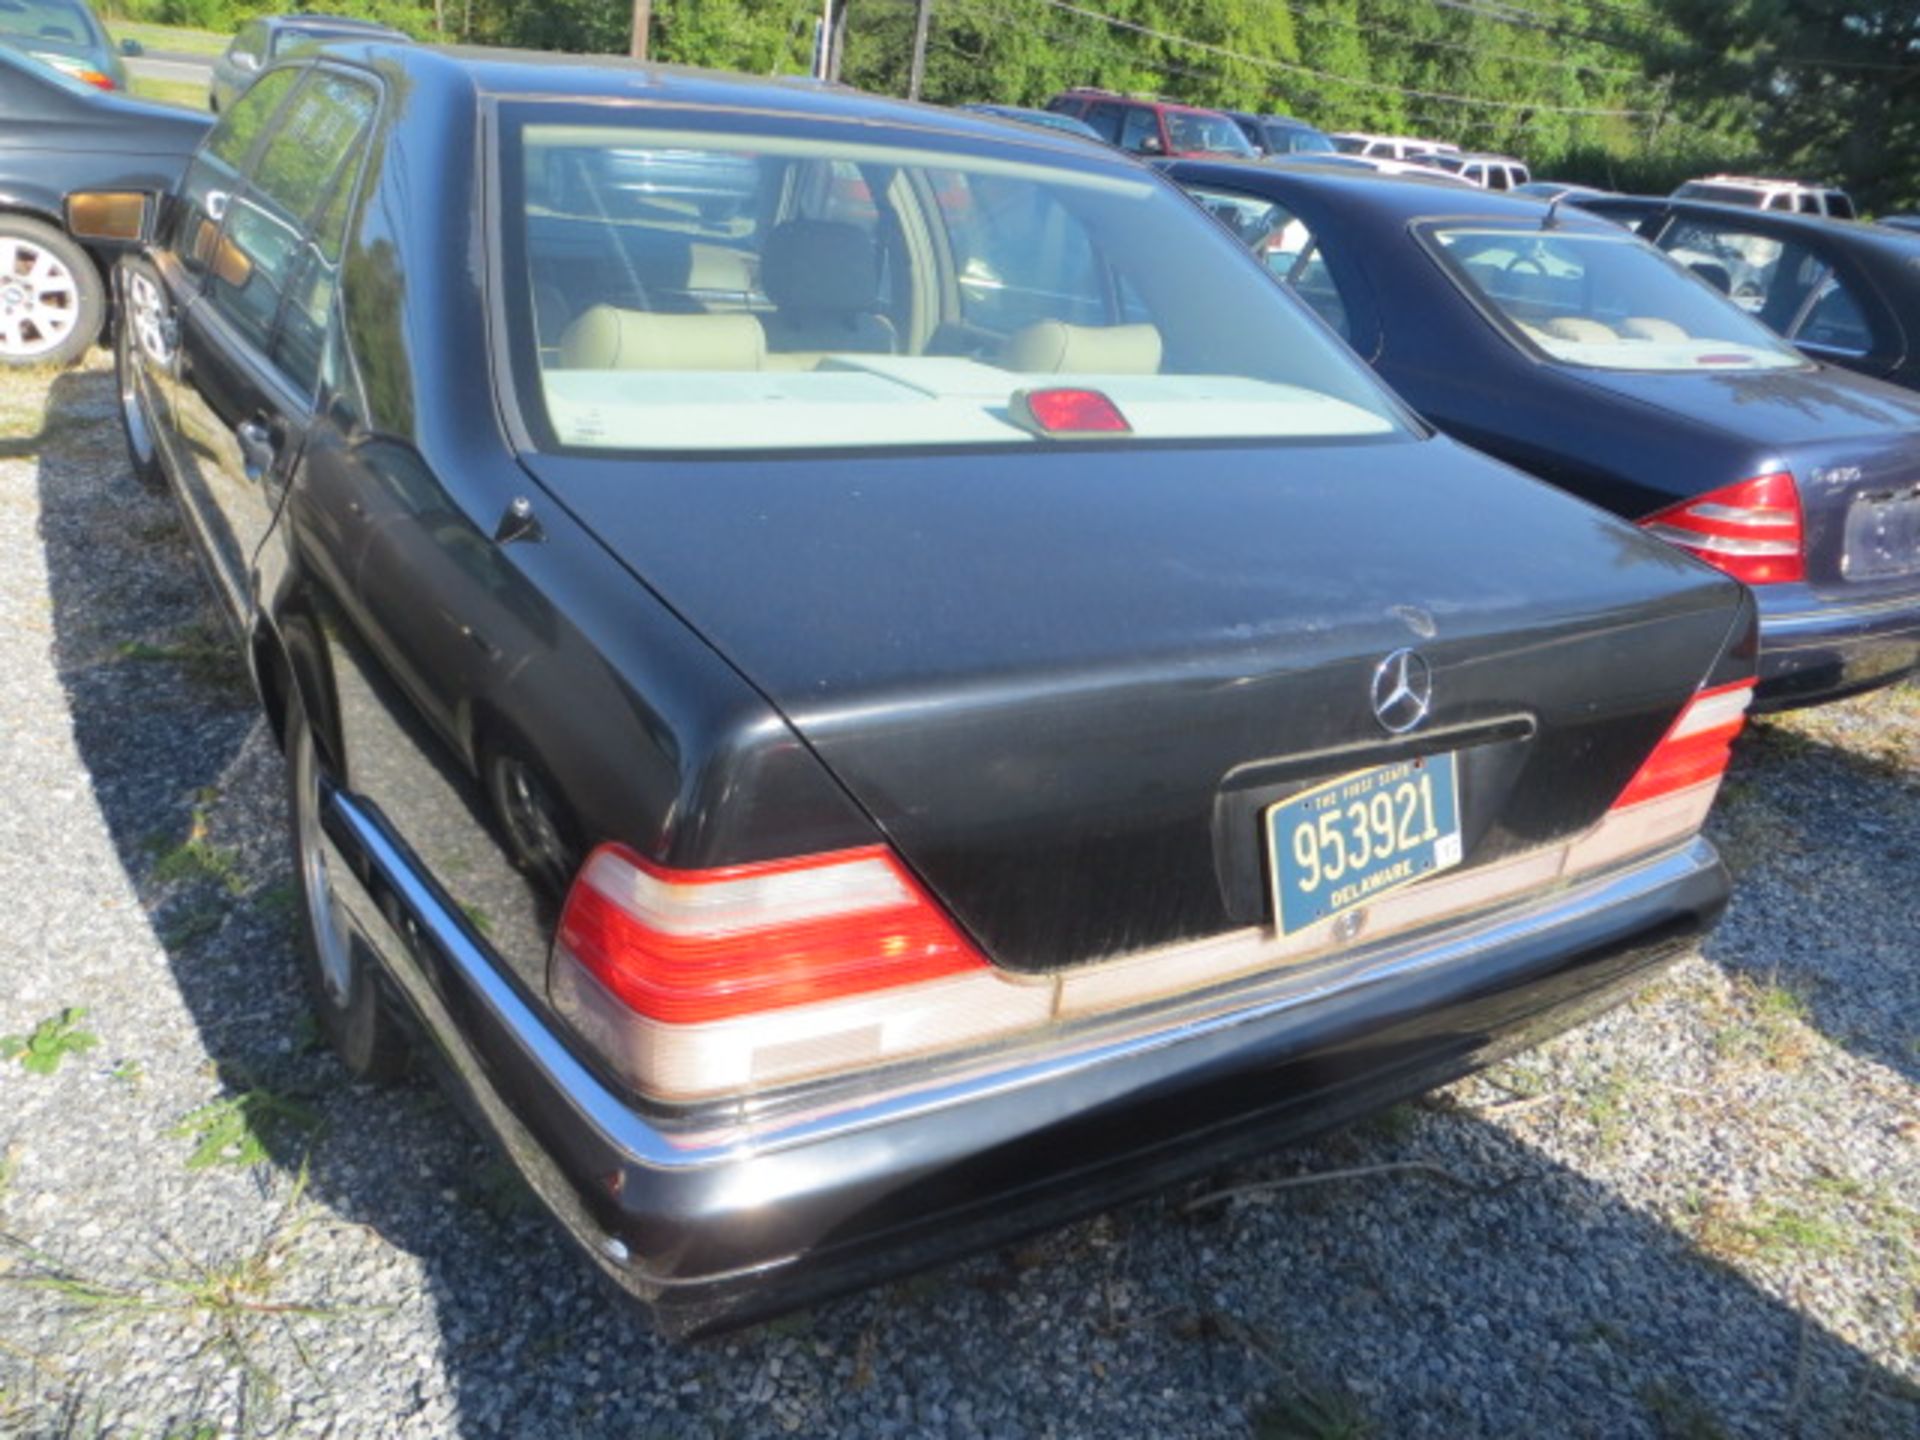 1999 Mercedes Benz- 147000 MILES,VIN WDBGA43G2XA408997, SOLD WITH TRANSFERABLE TITLE, NO KEYS - Image 3 of 3